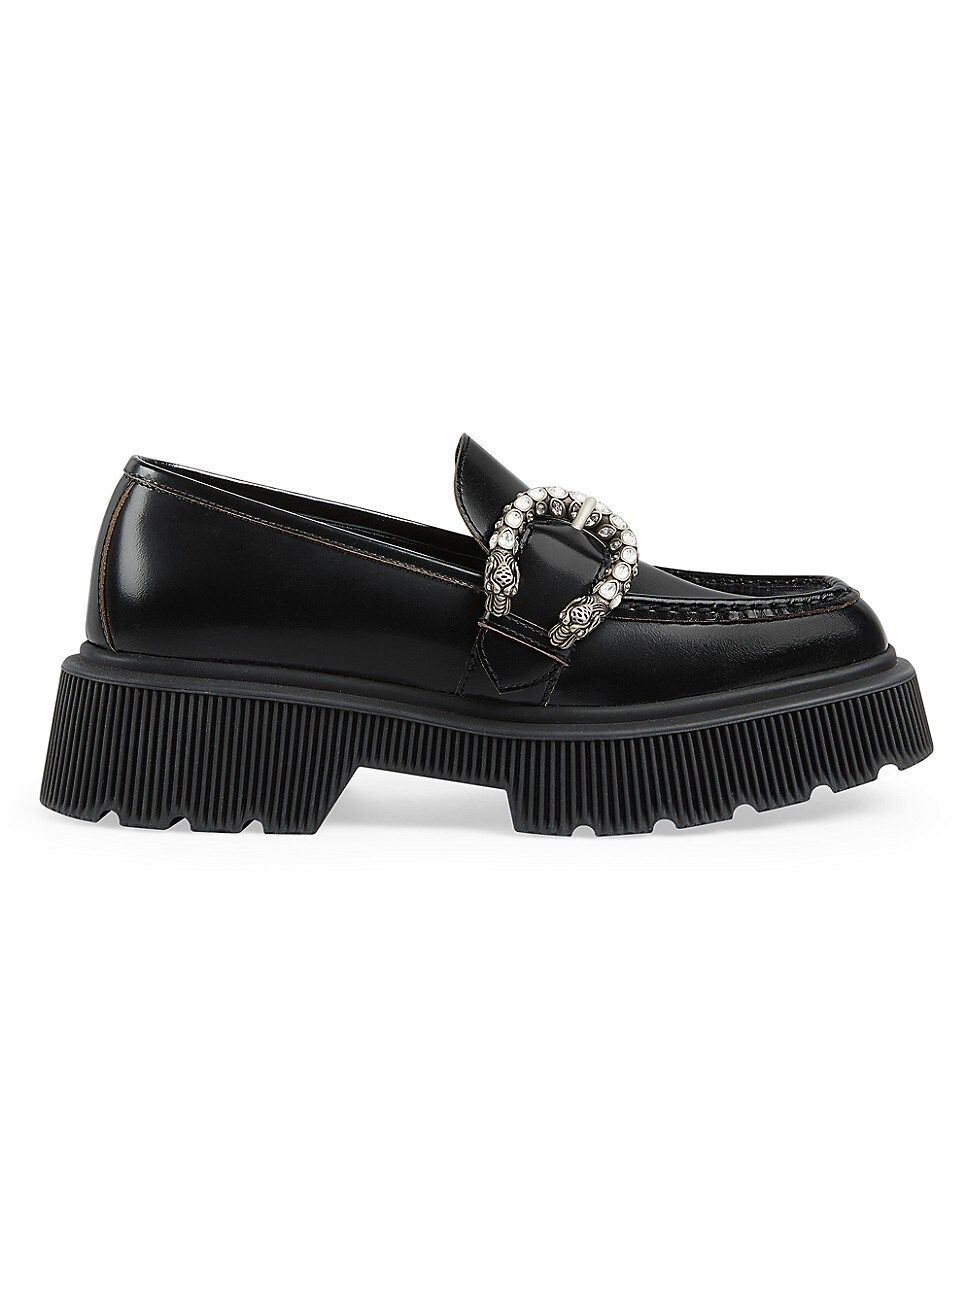 Gucci Women's Lug Sole with Buckle Drivers - Nero - Size 36.5 (6.5) | Saks Fifth Avenue